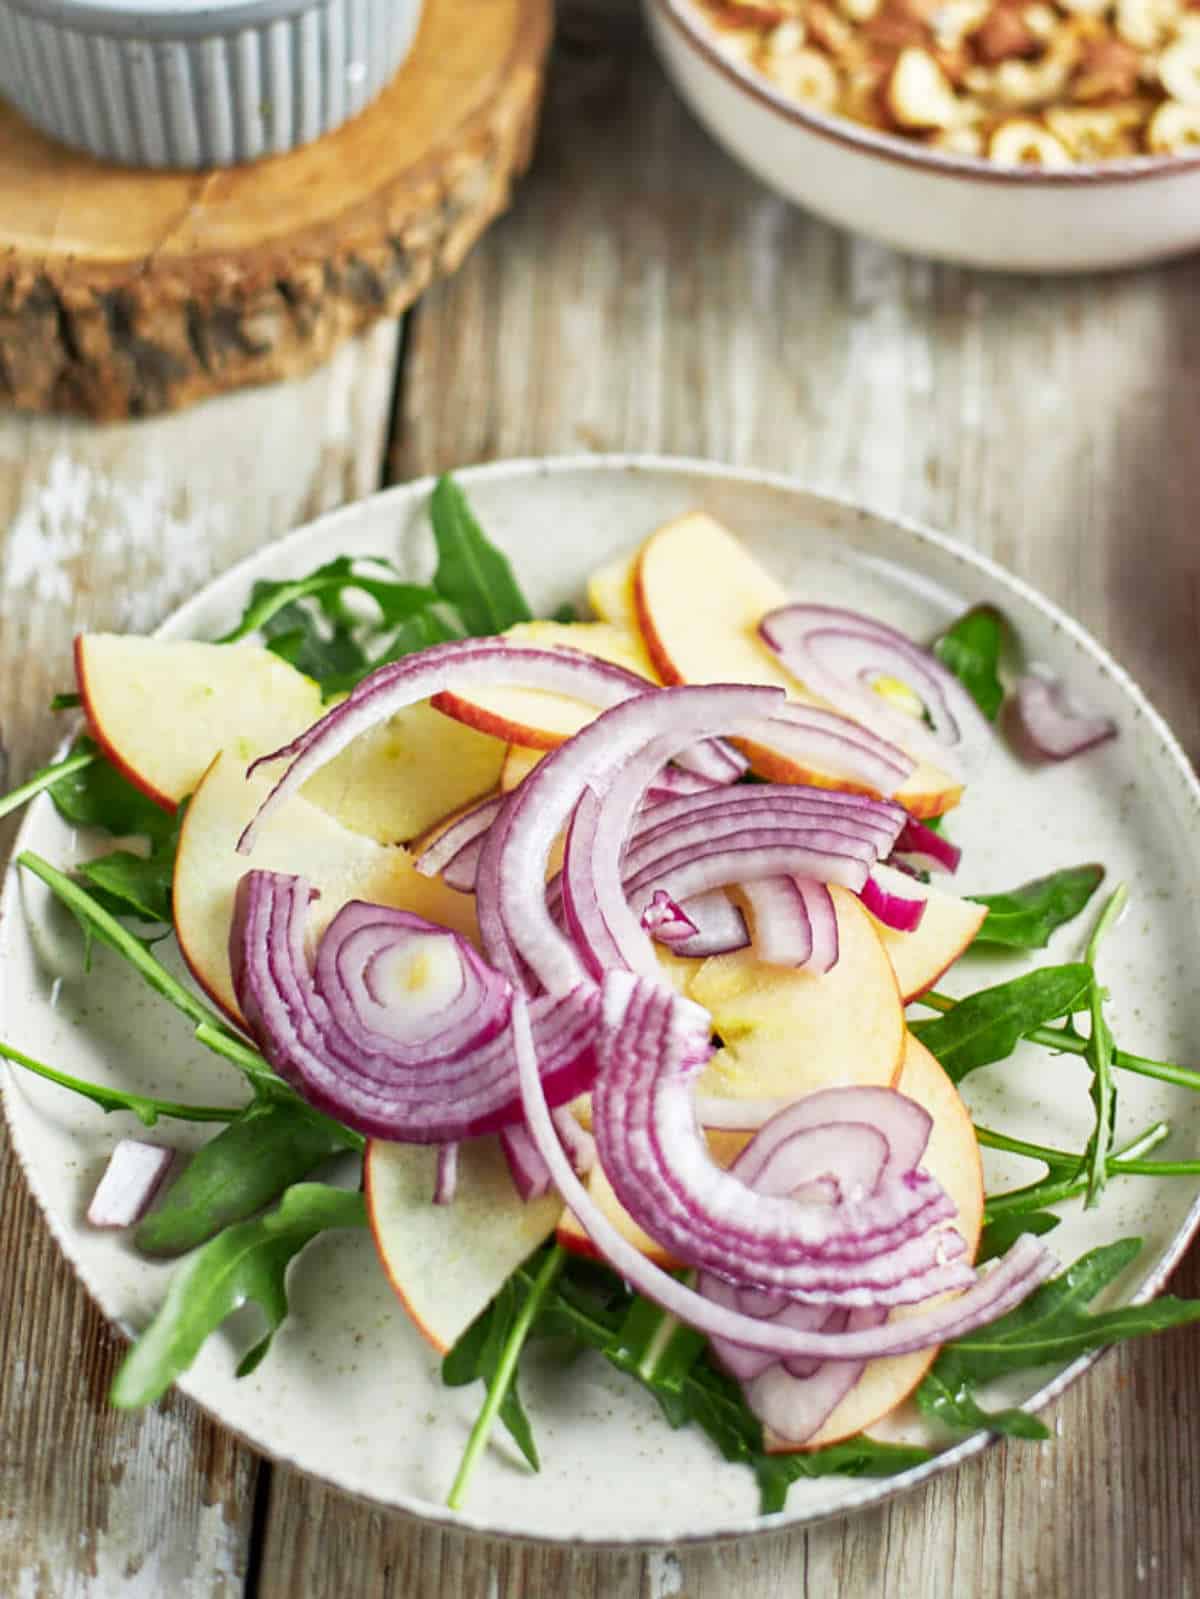 Slices of thin red onion topping slices of apples on arugula.